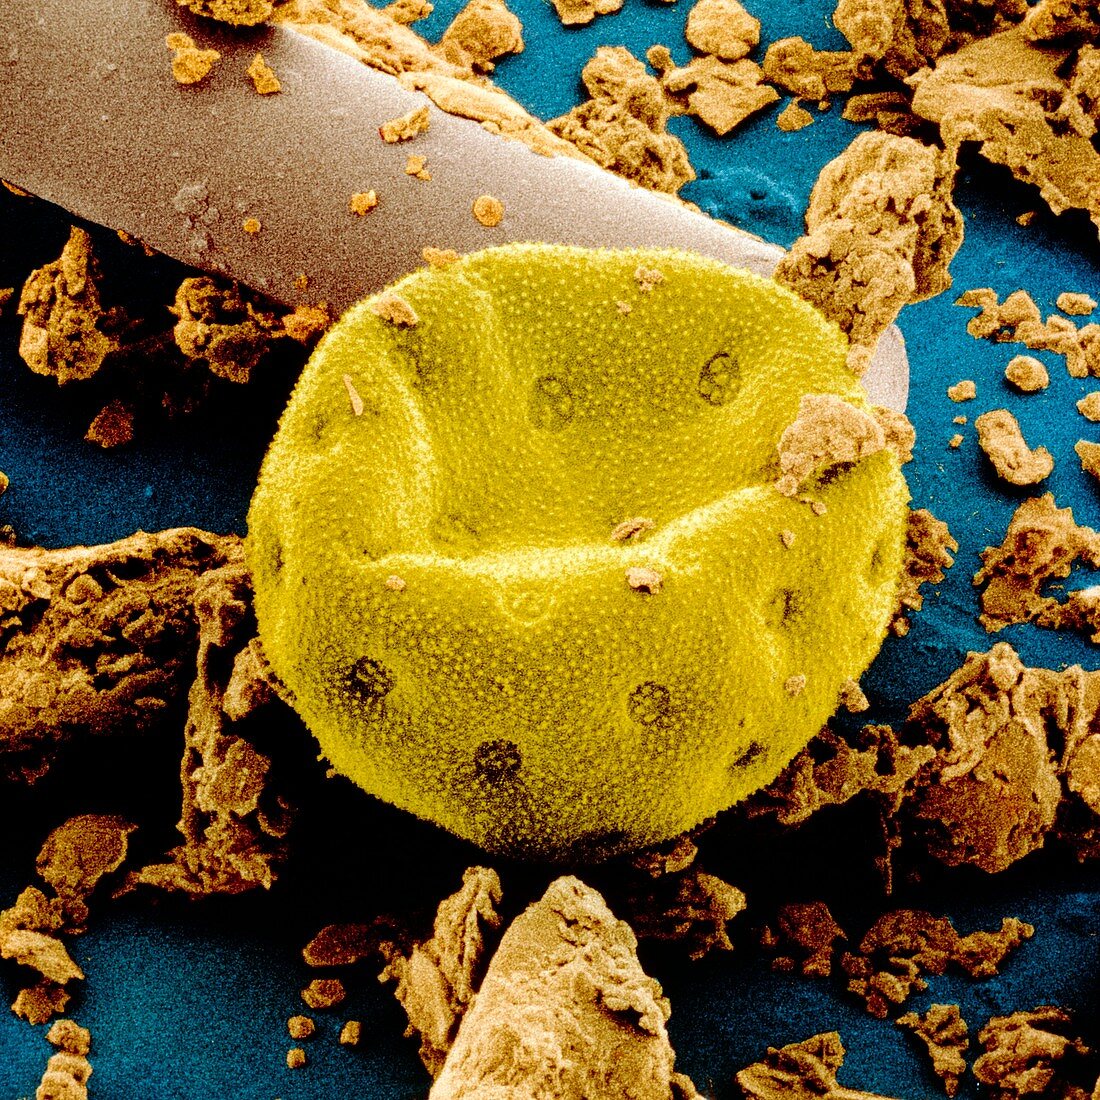 Pollen of Lambsquarter plant in dust